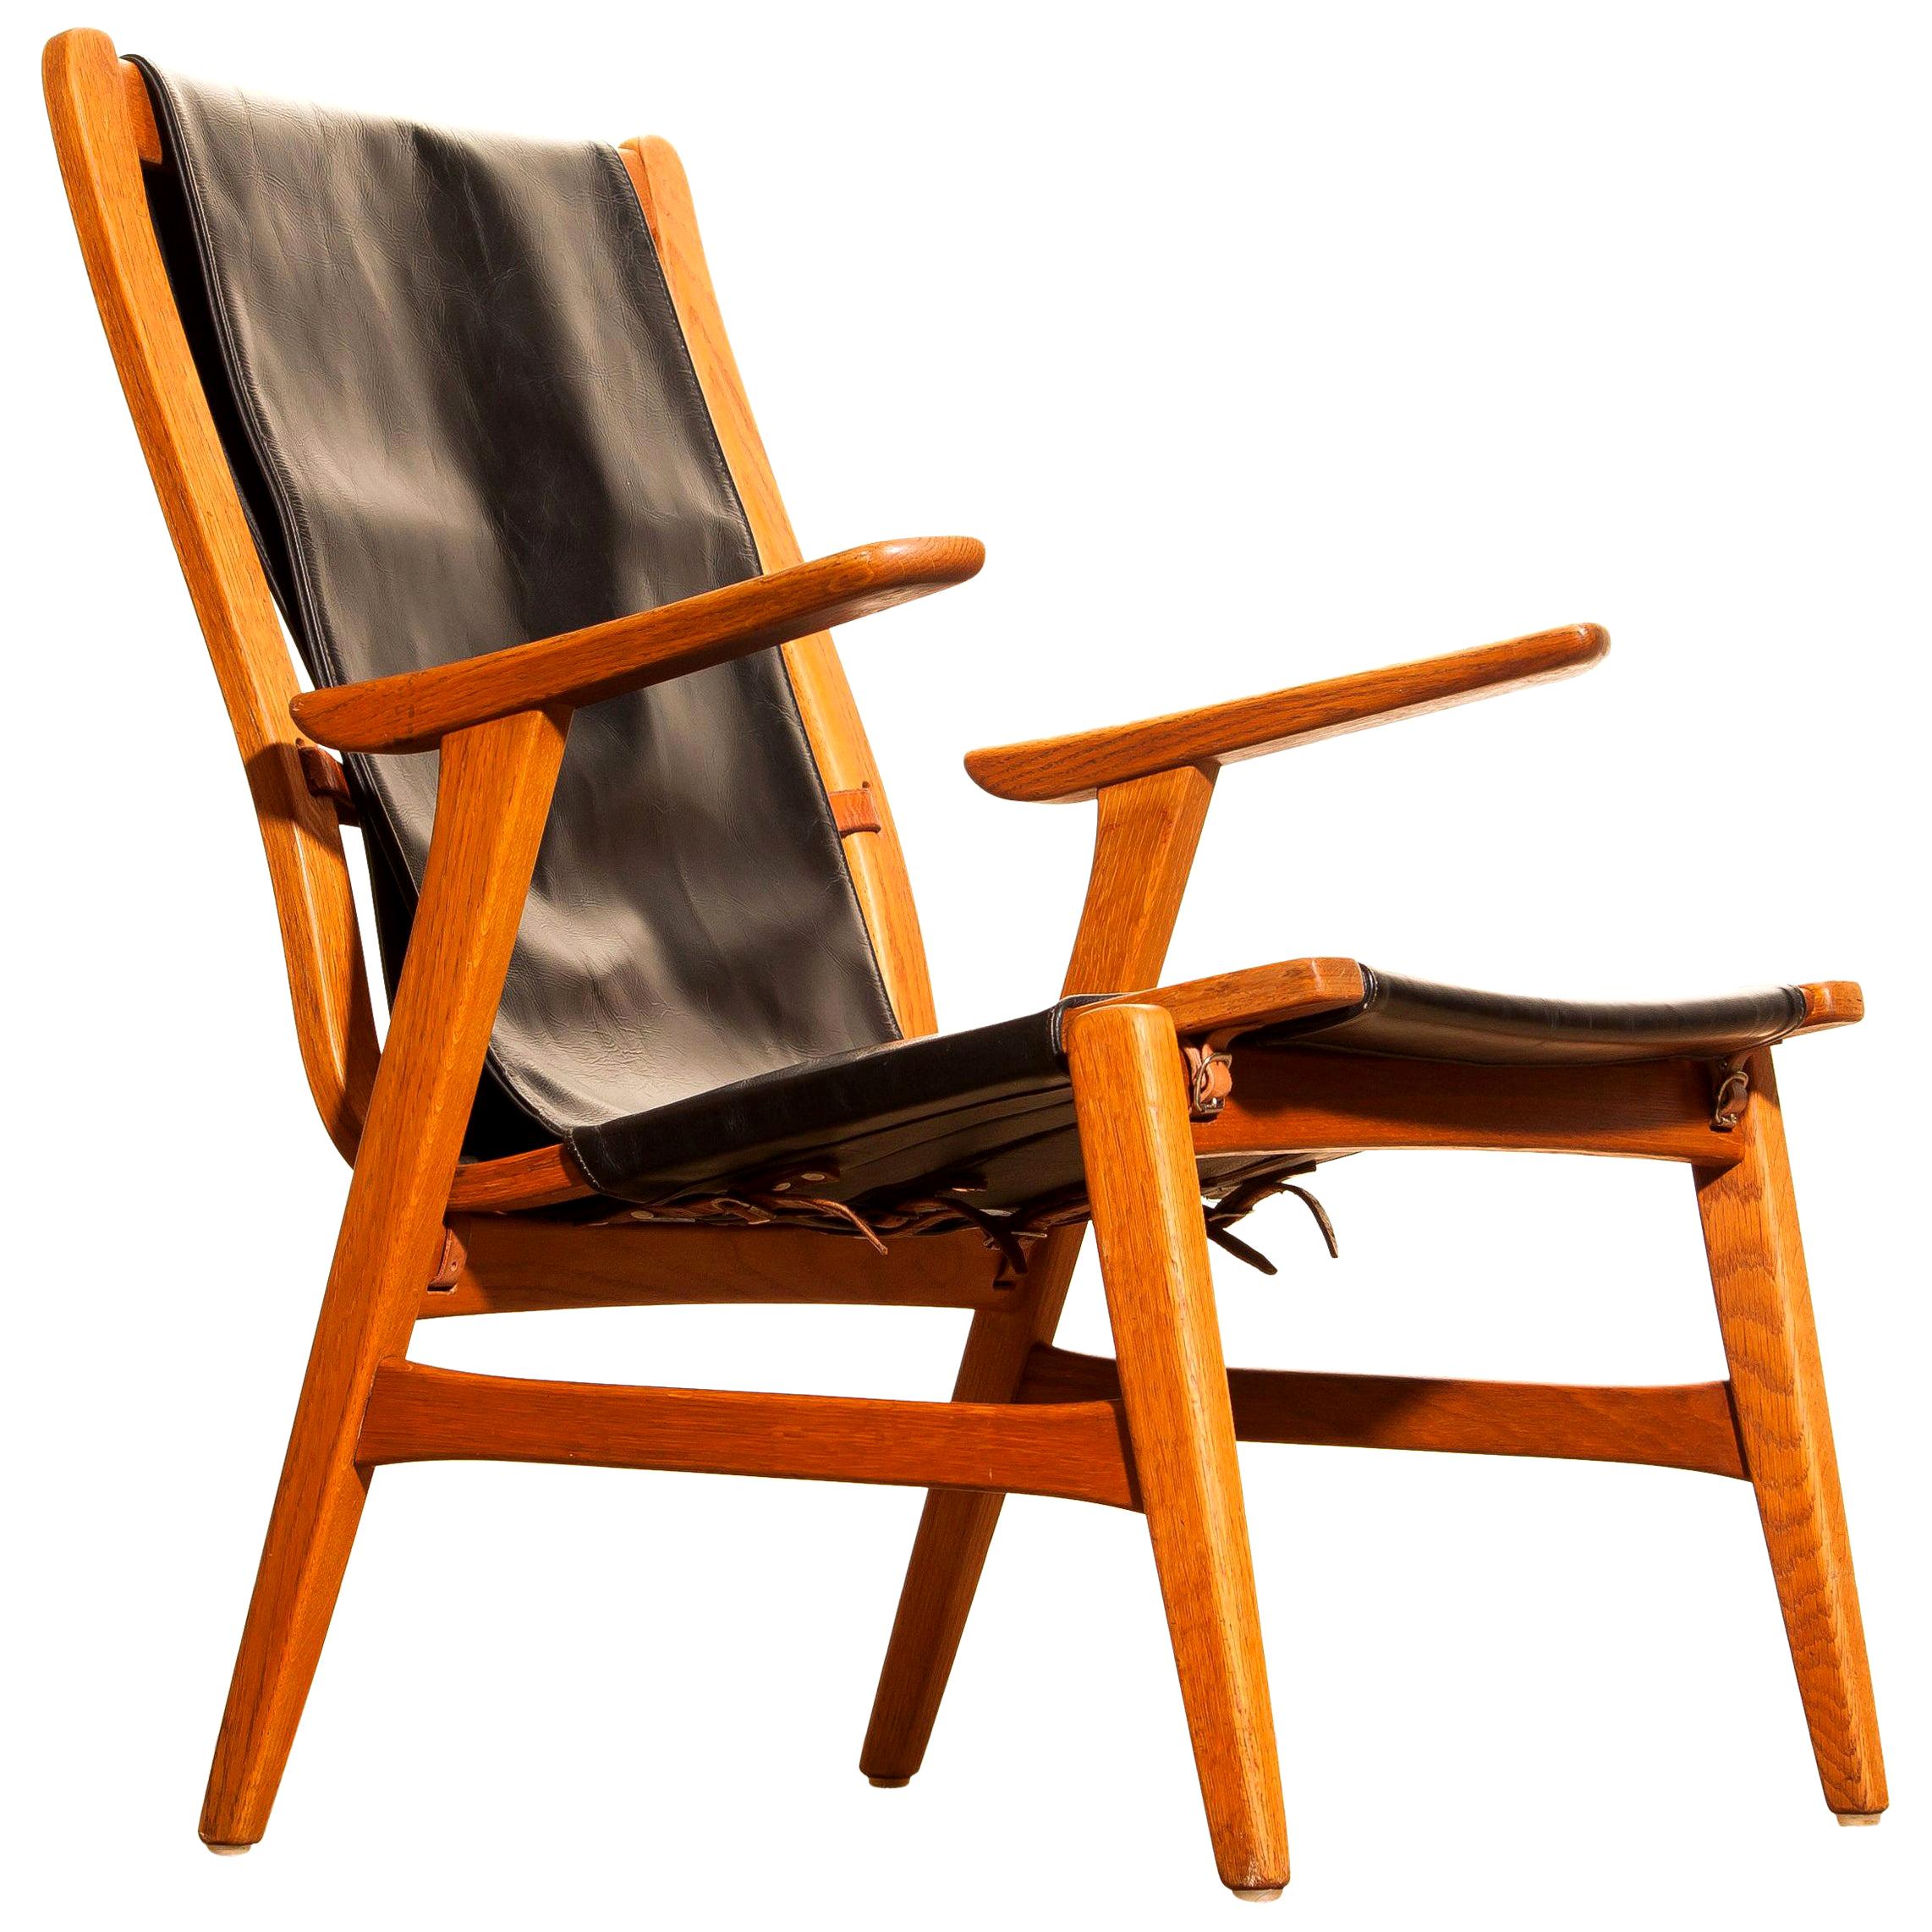 Mid-20th Century 1950s, Oak and Leatherette Hunting Lounge Chair 'Ulrika' by Östen Kristiansson